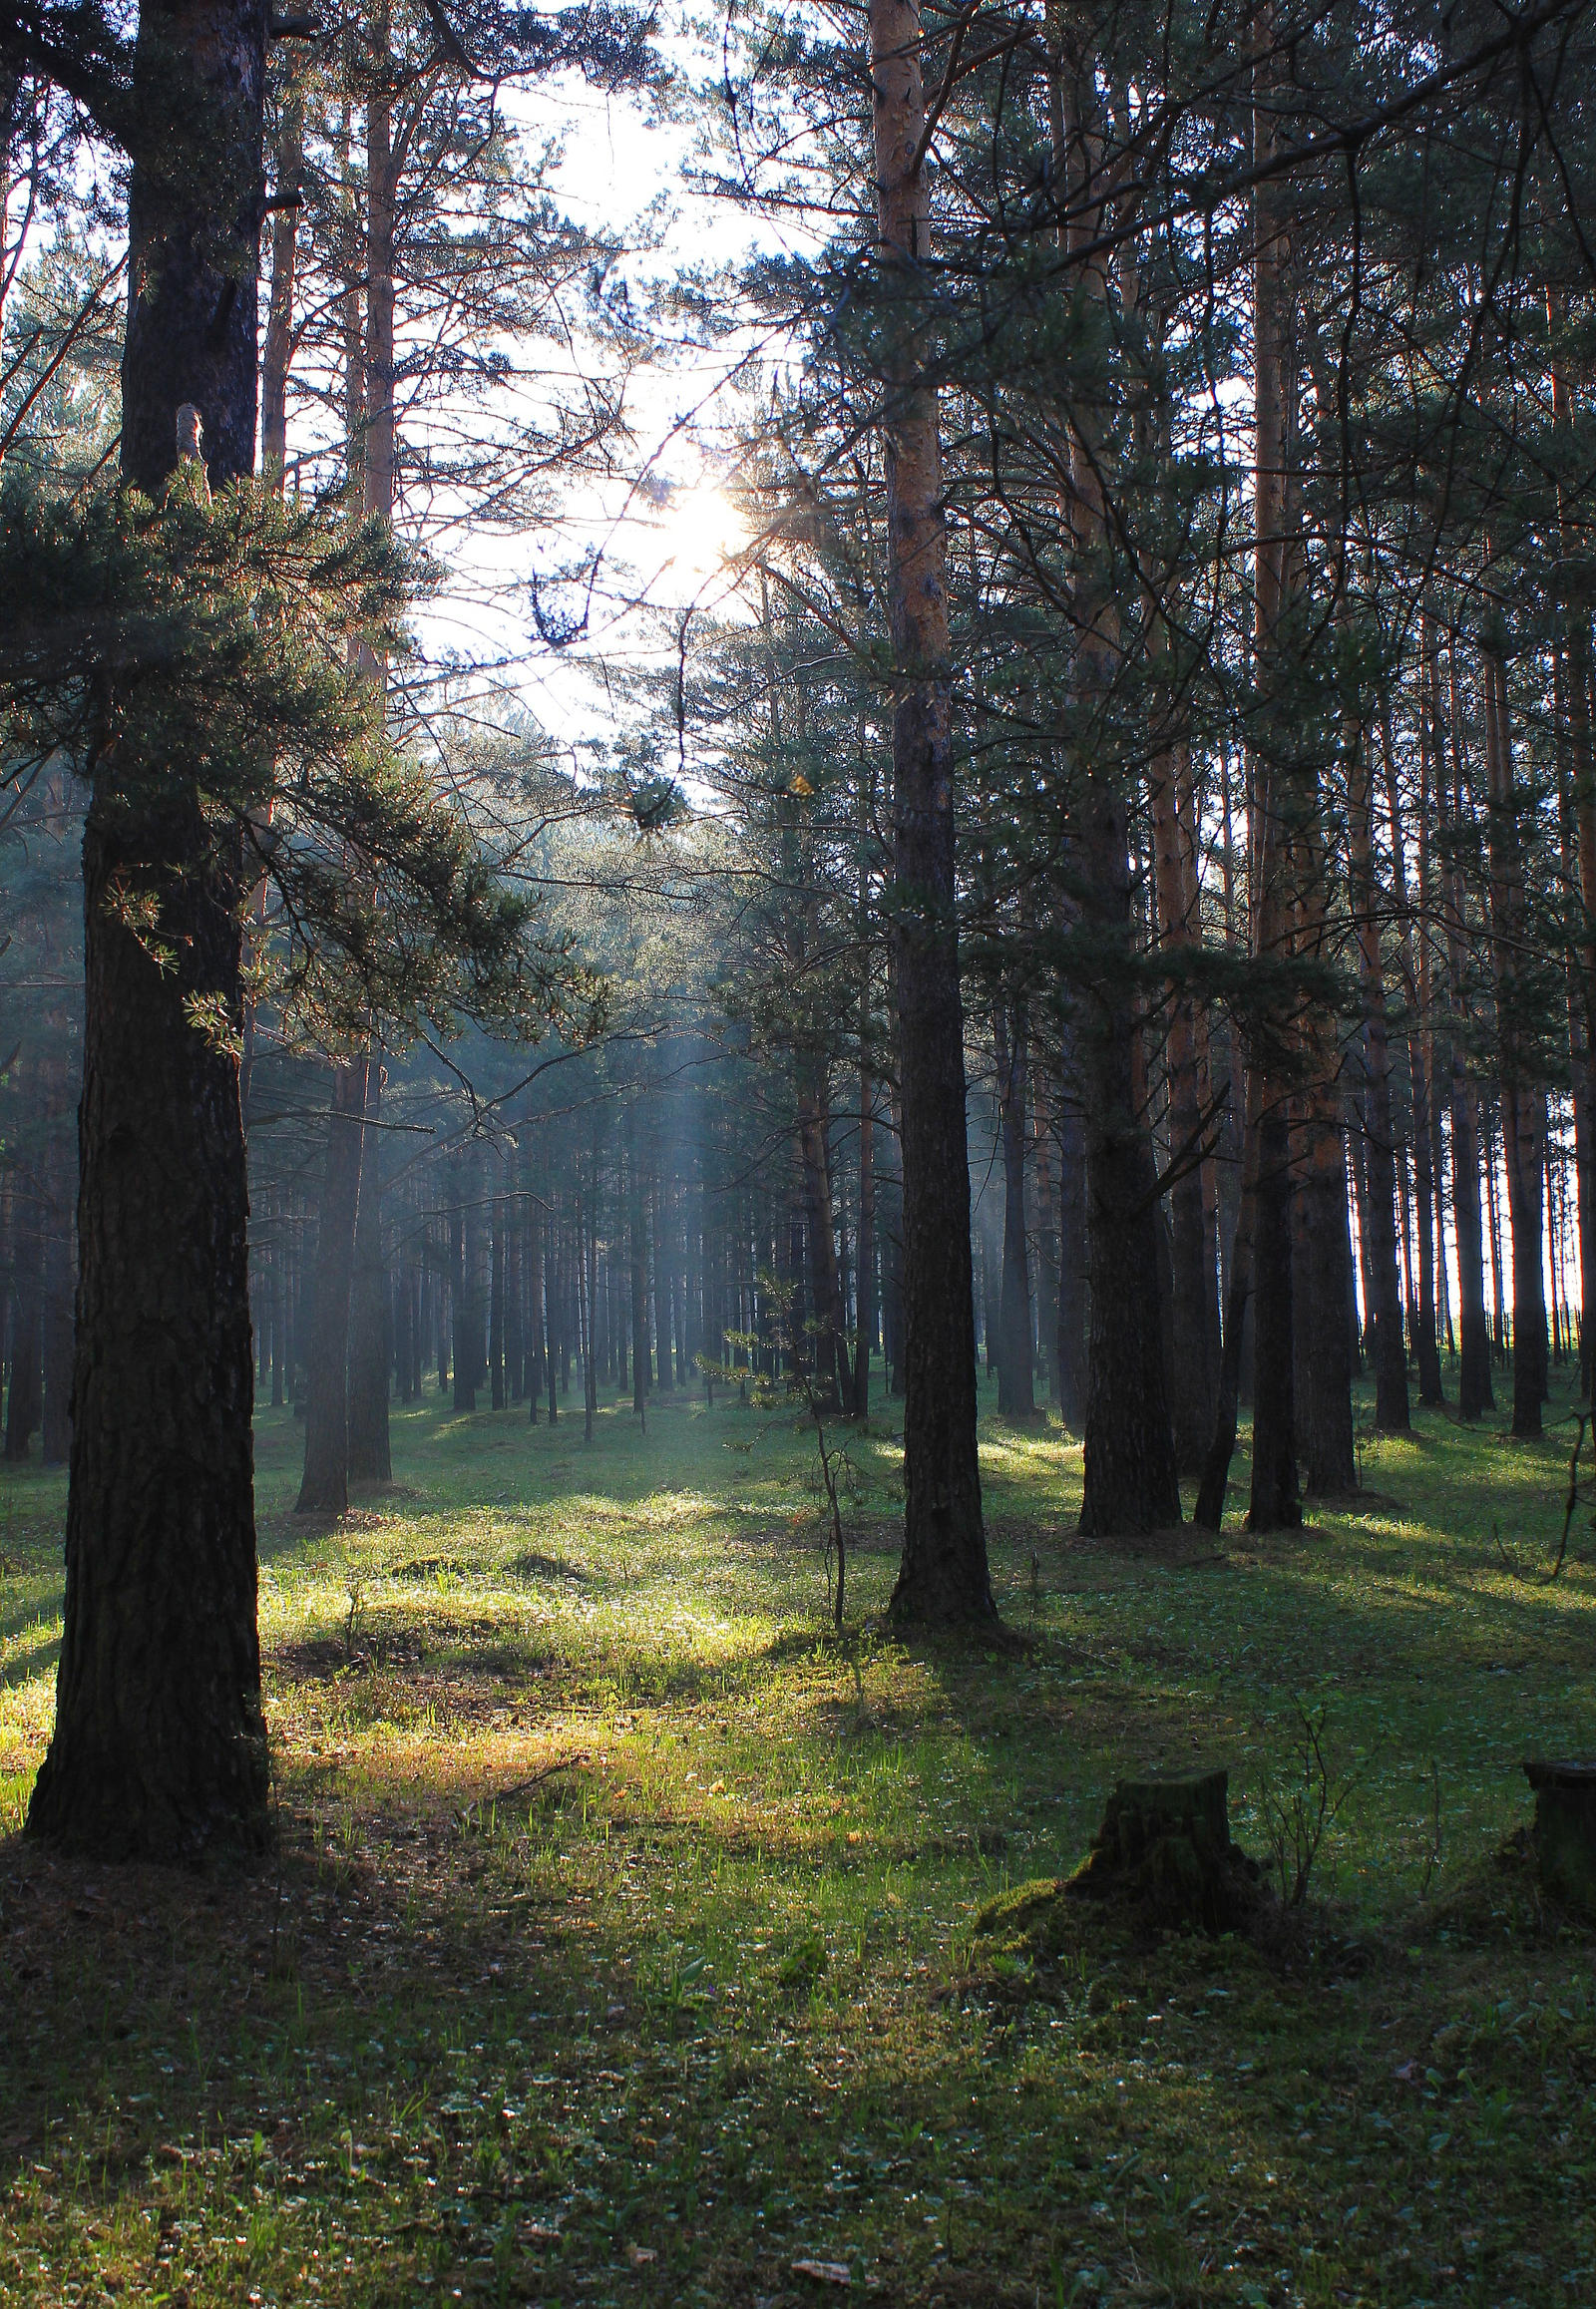 The rays in a pine forest